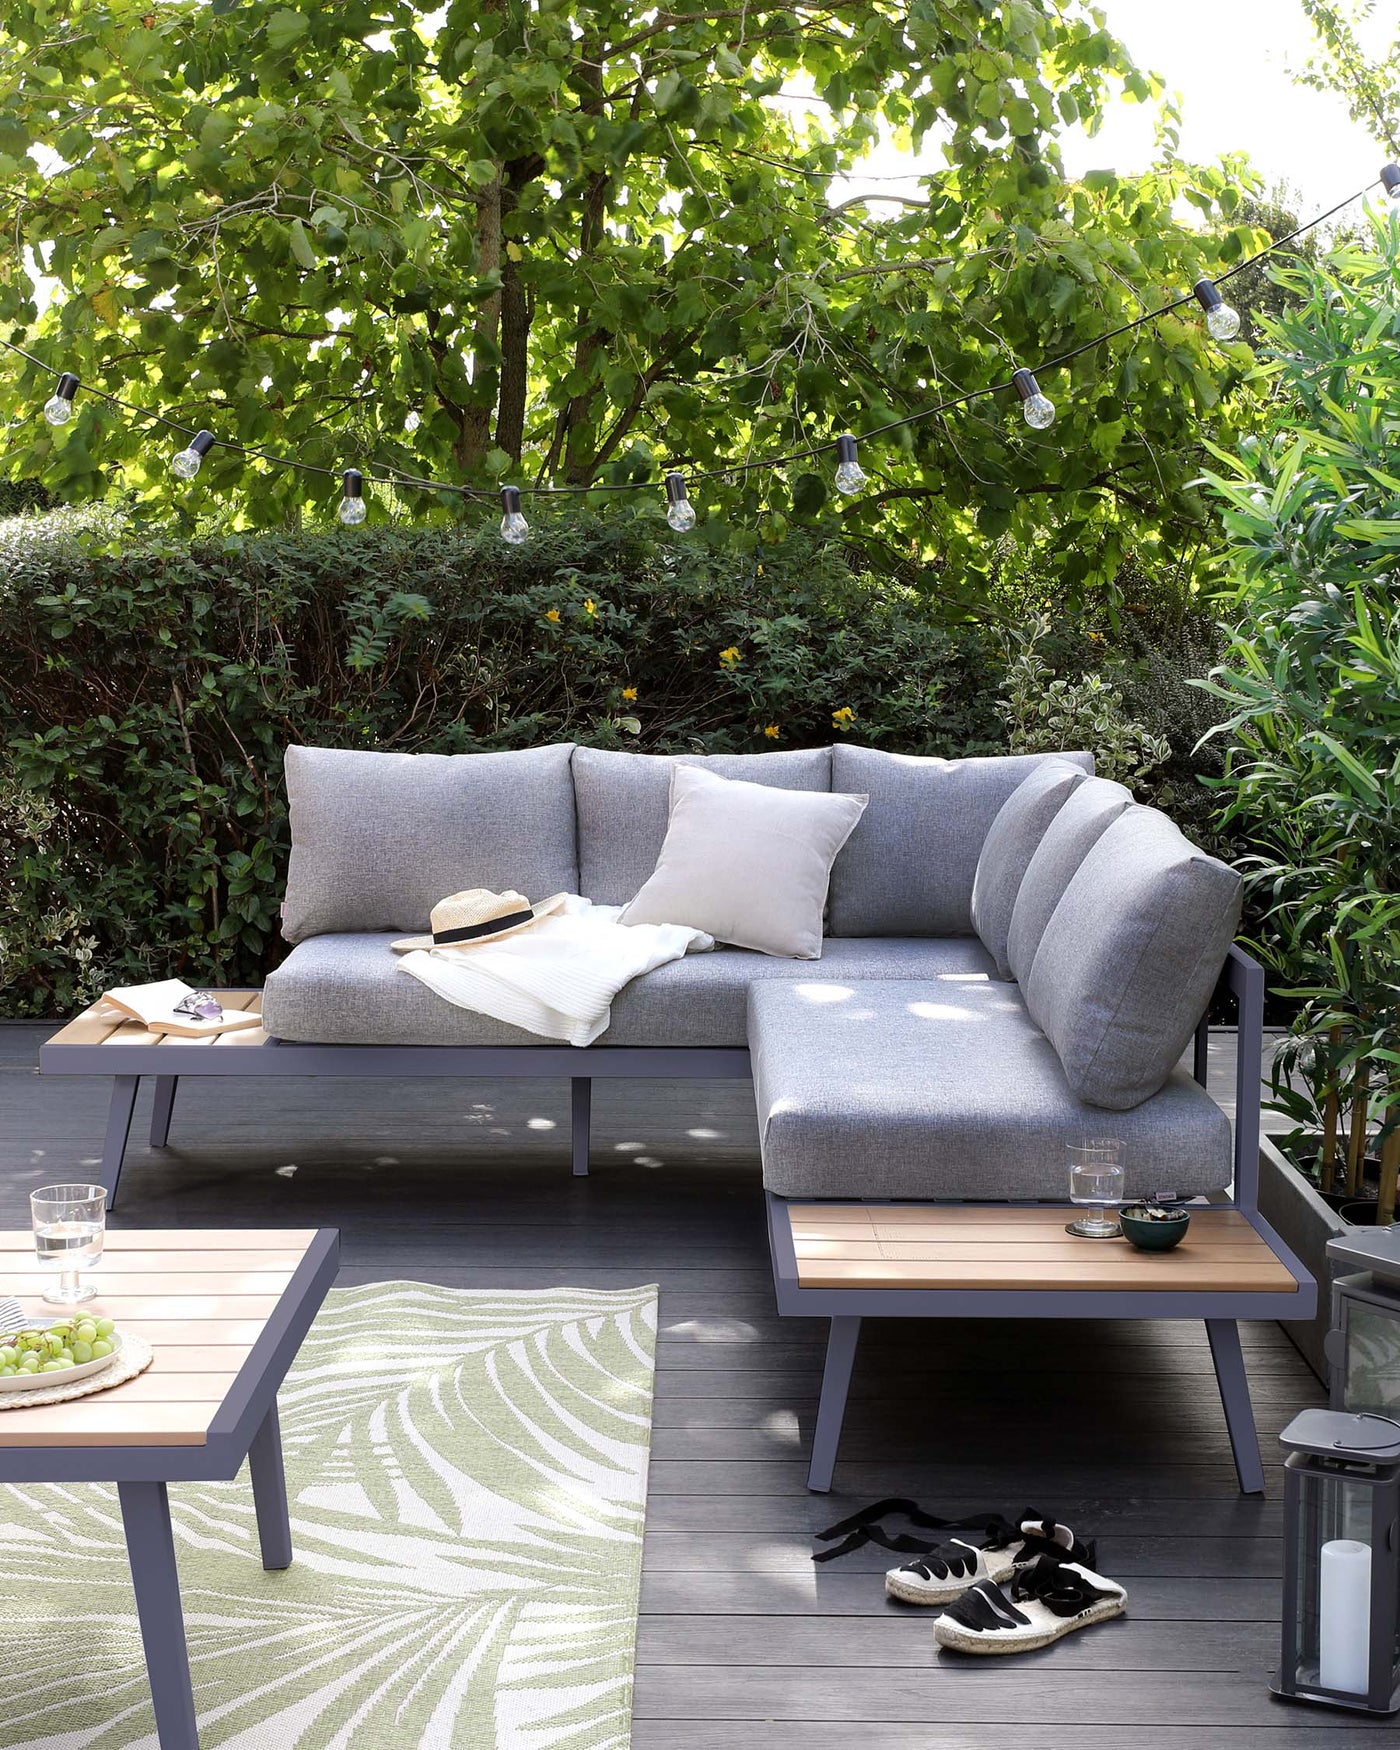 Modern outdoor furniture set featuring a grey sectional sofa with plush cushions and a matching low-profile coffee table with a wooden tabletop. The setting is completed by a patterned outdoor rug and atmospheric string lights overhead, all set against a lush backdrop of greenery and a wooden deck.